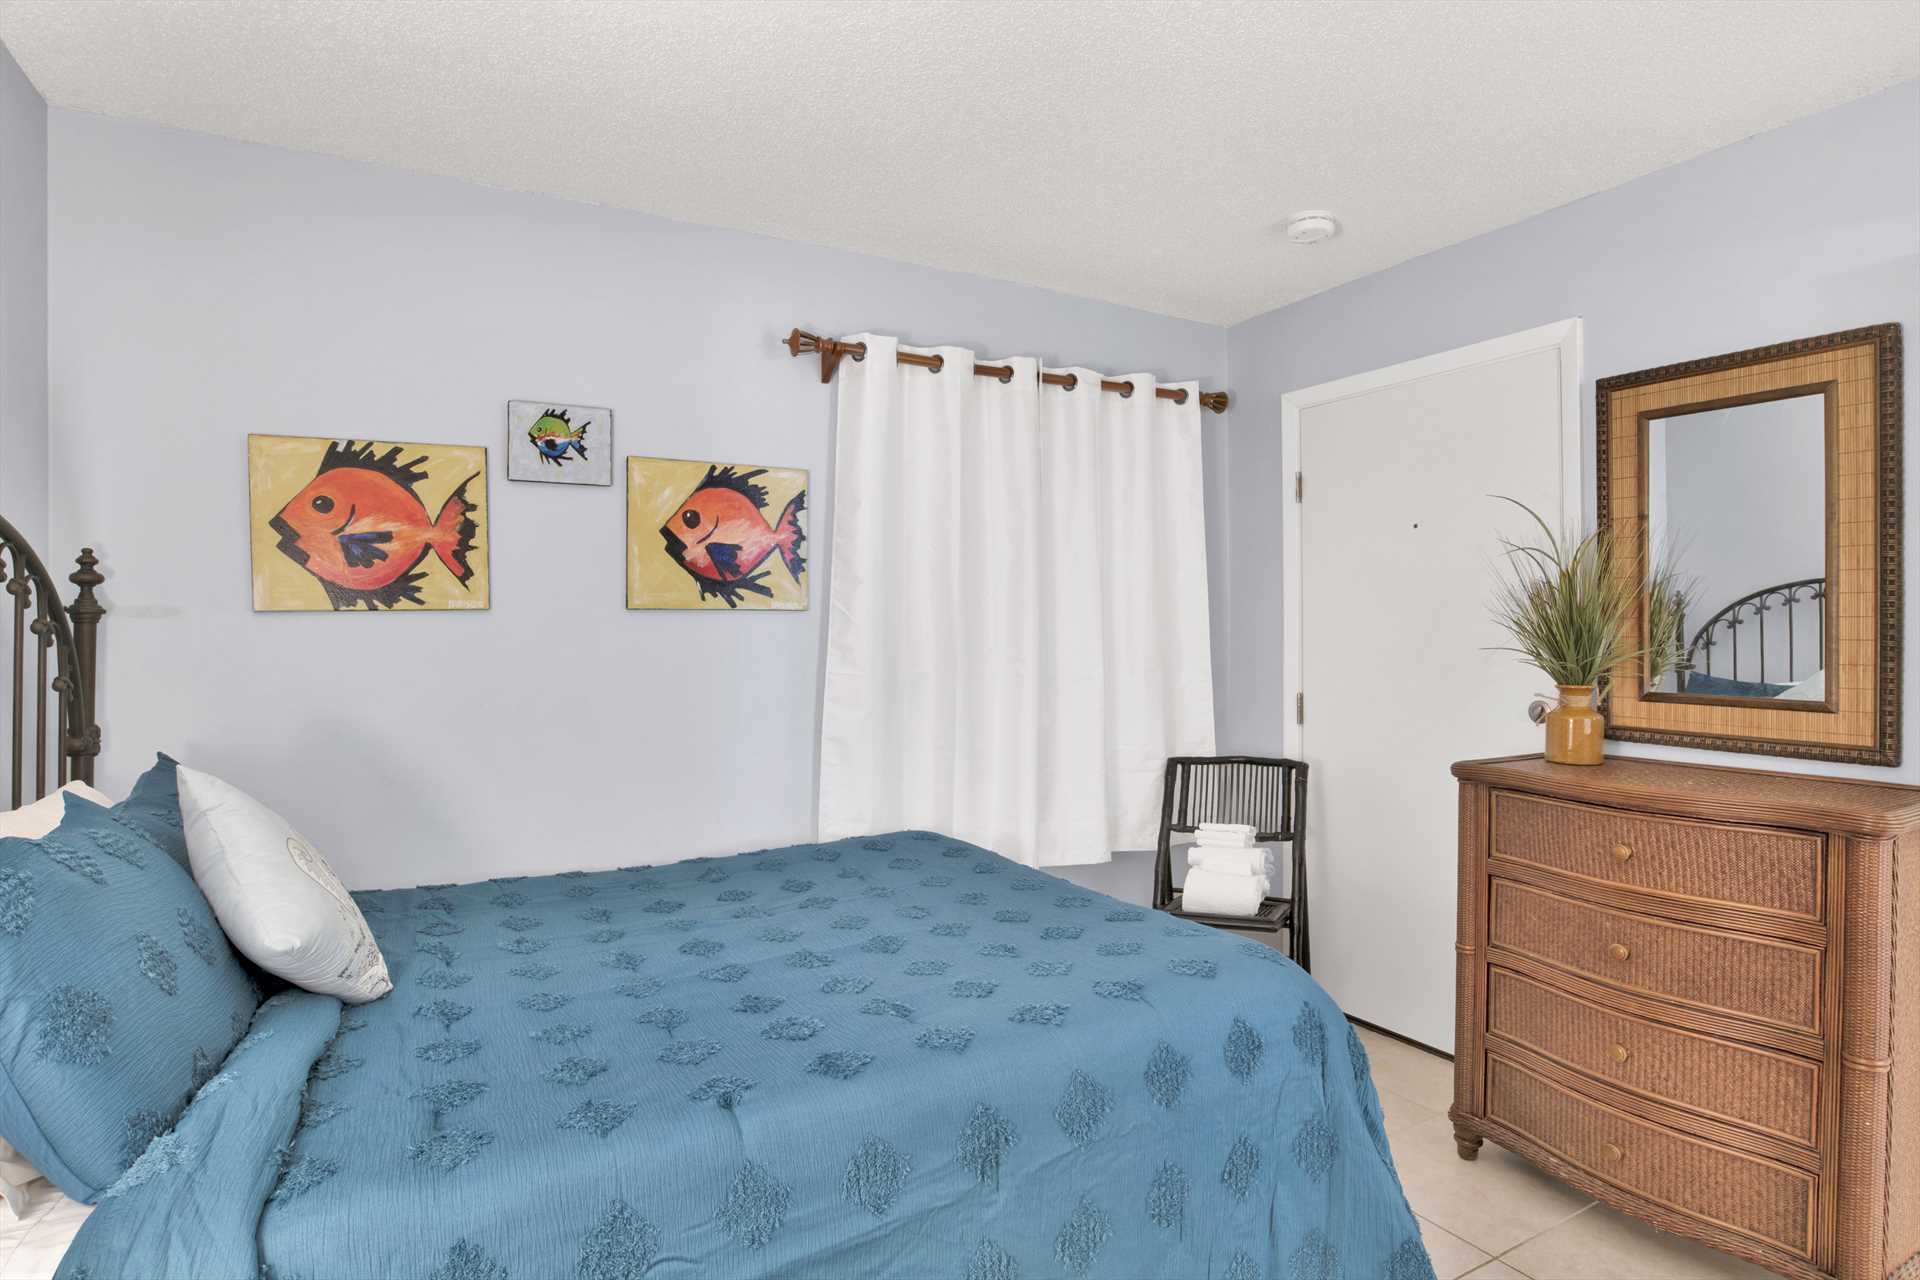 The second bedroom includes a queen-sized bed and closet for